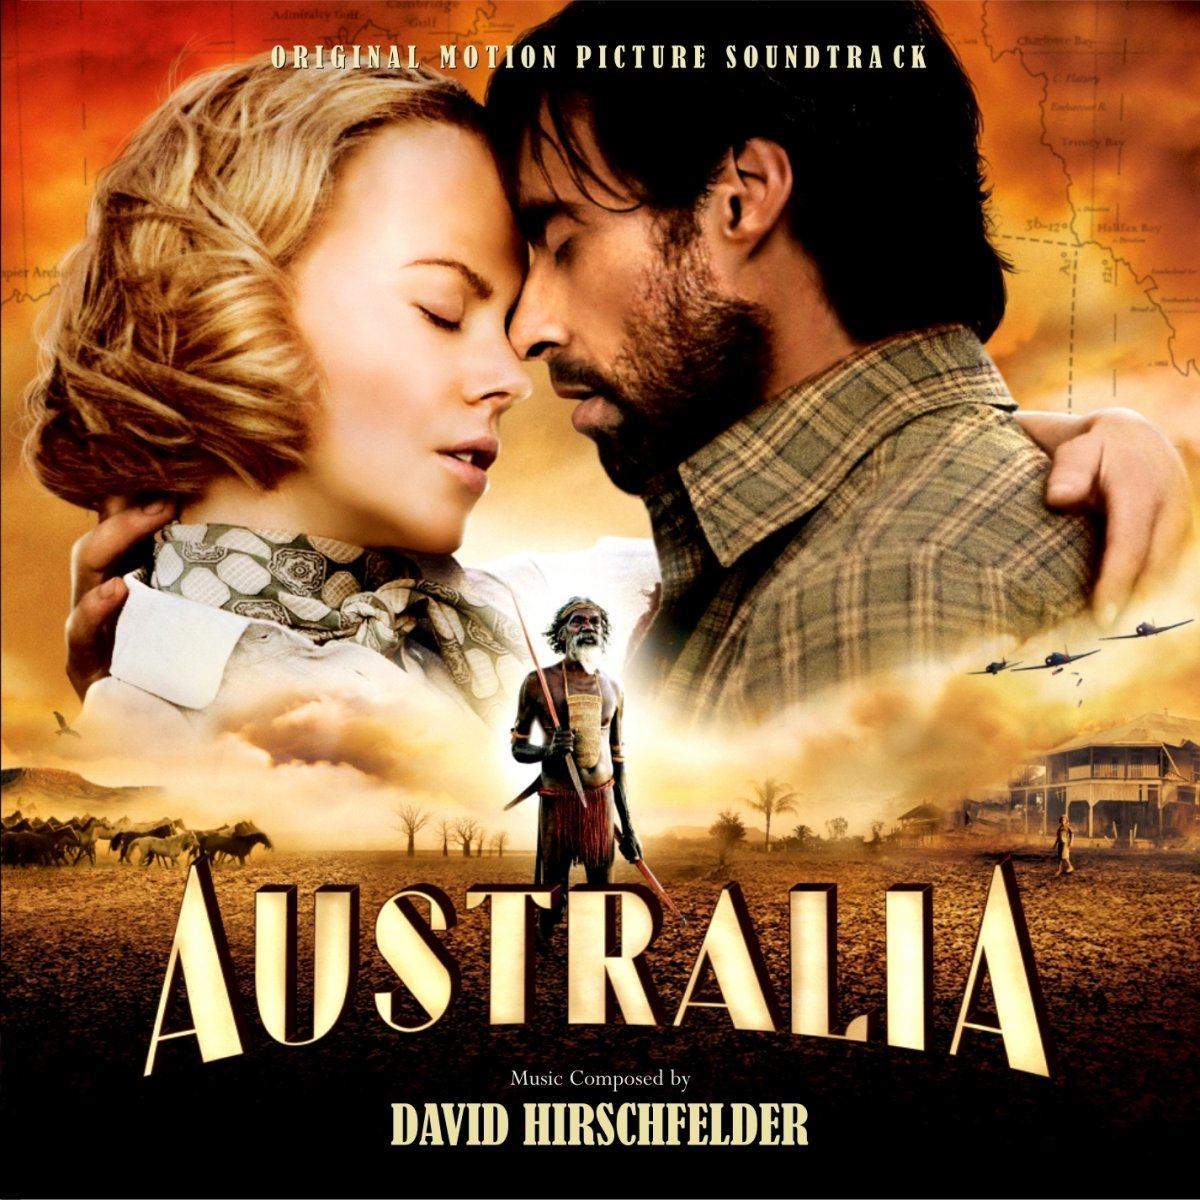 movies to see before a trip to Australia